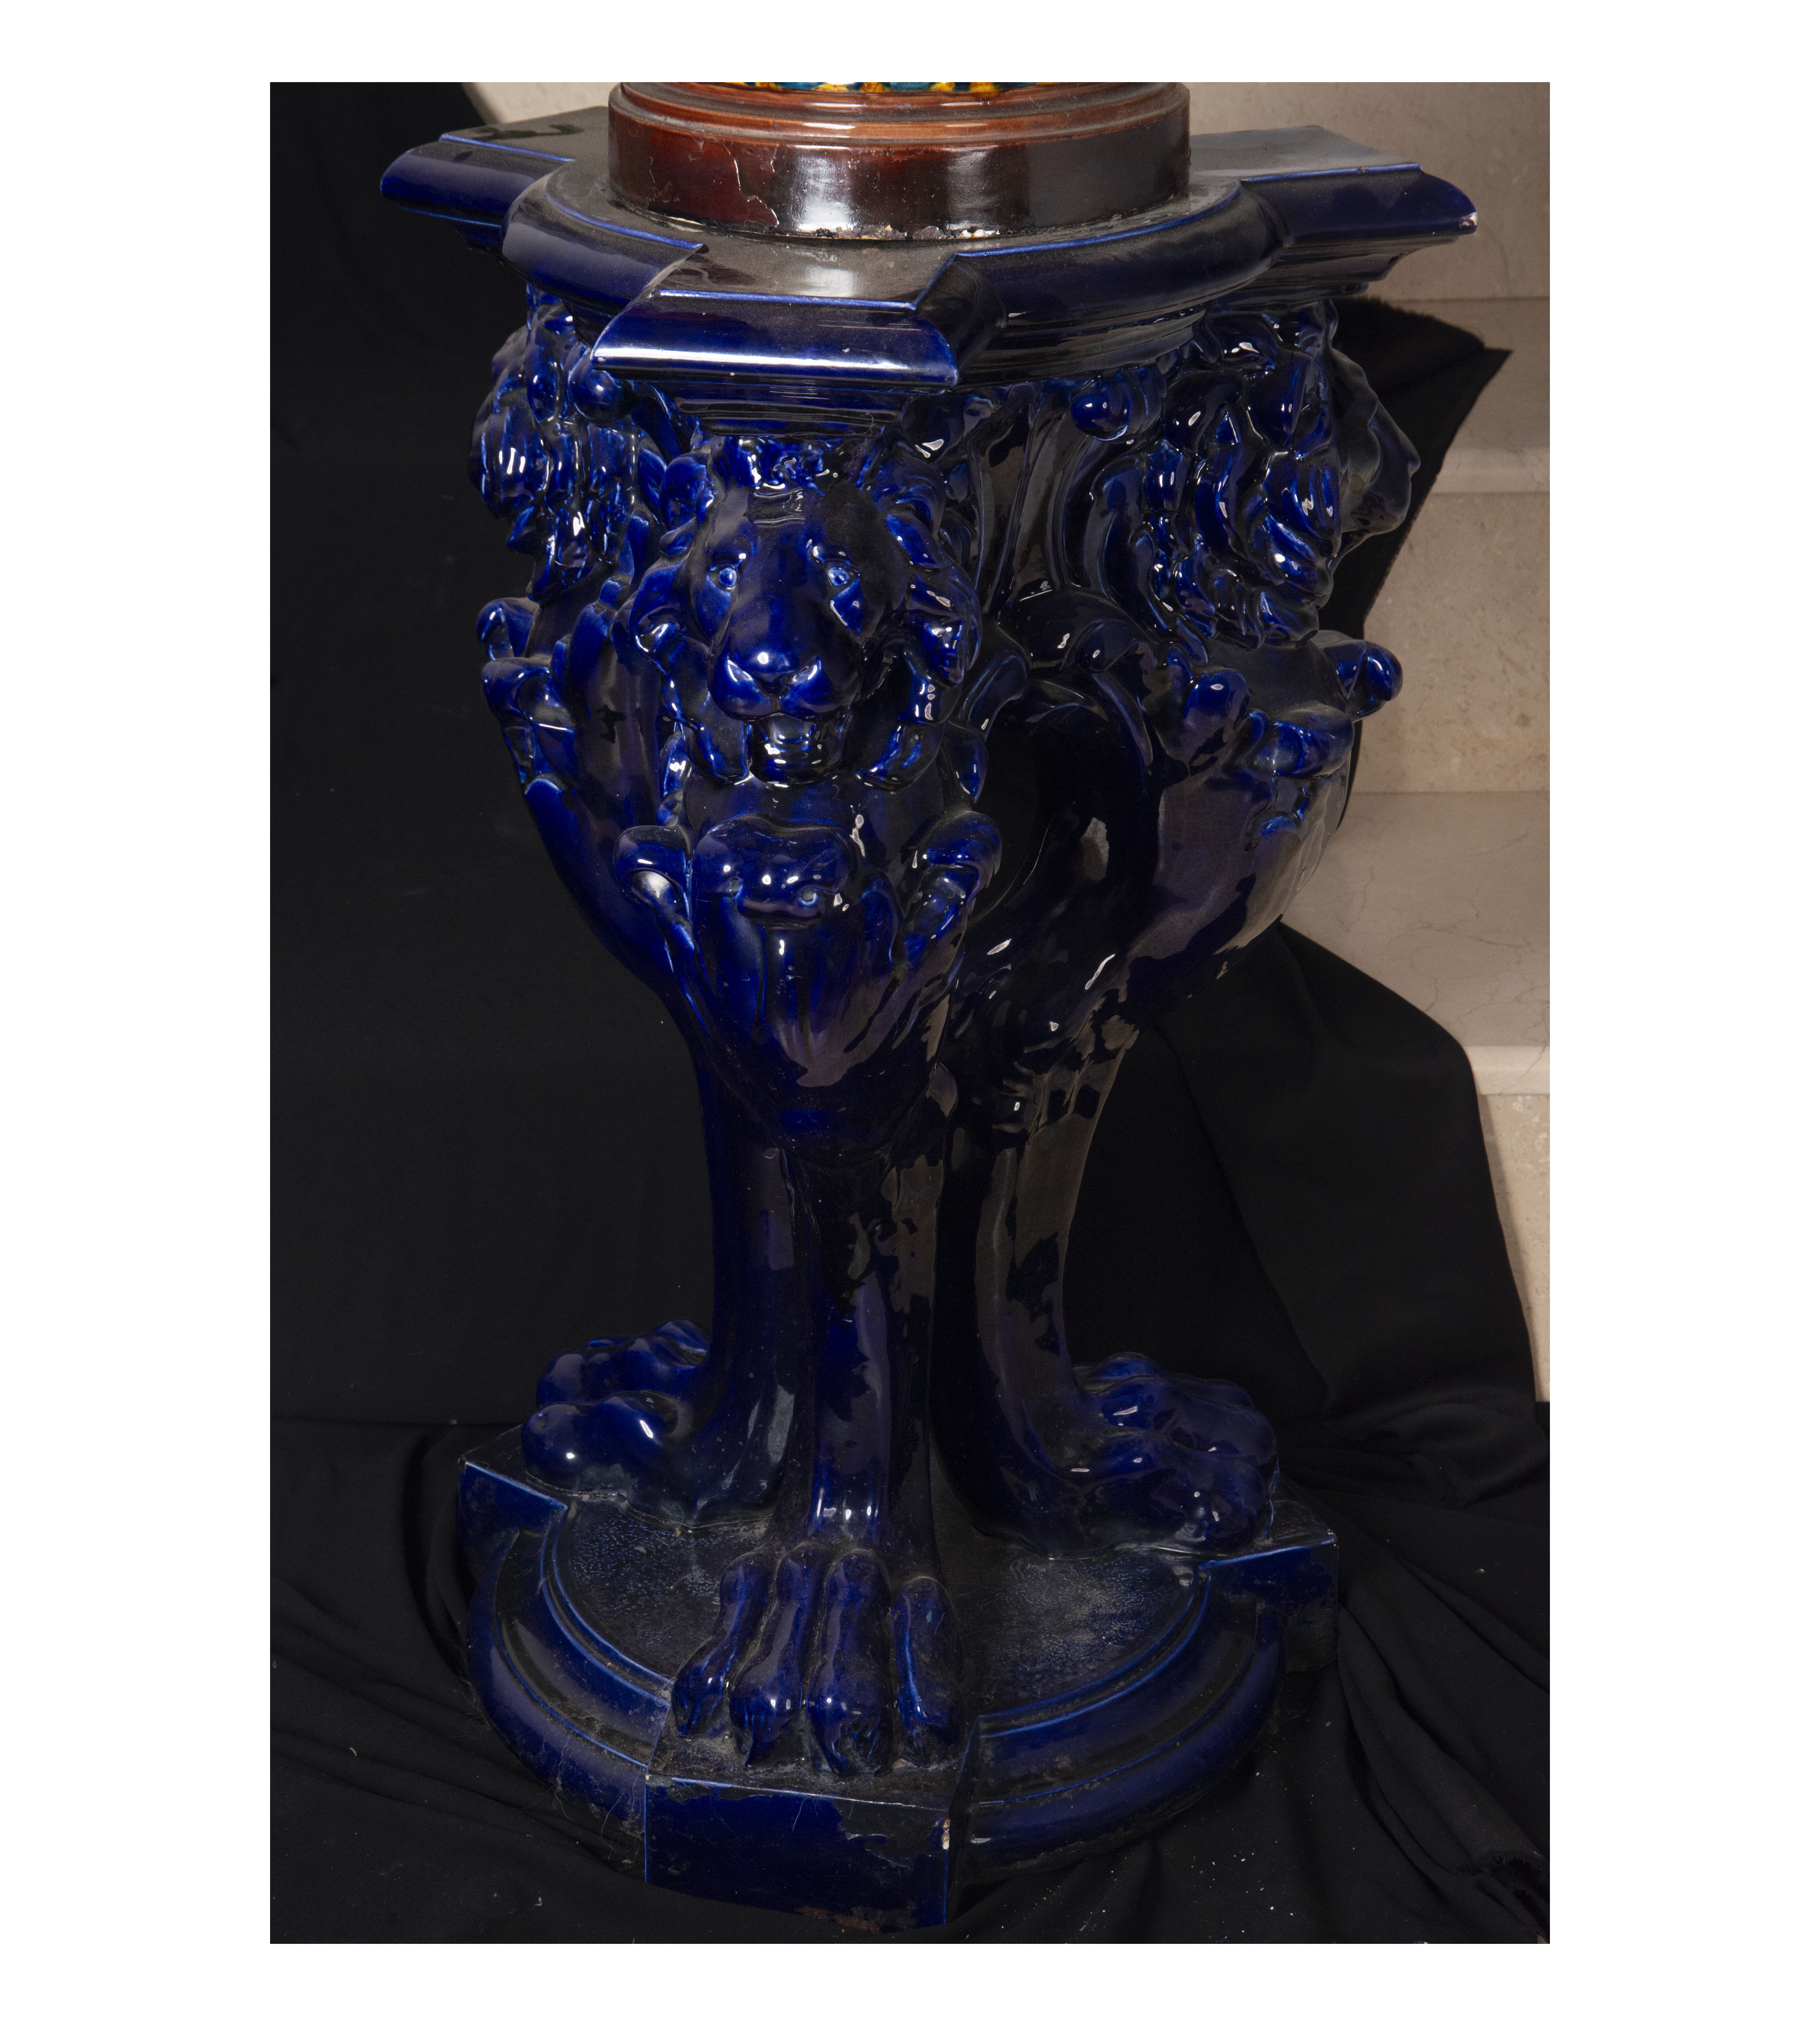 Large French Planter in cobalt blue glazed and polychrome stoneware in the Art Nouveau style, around - Image 6 of 6